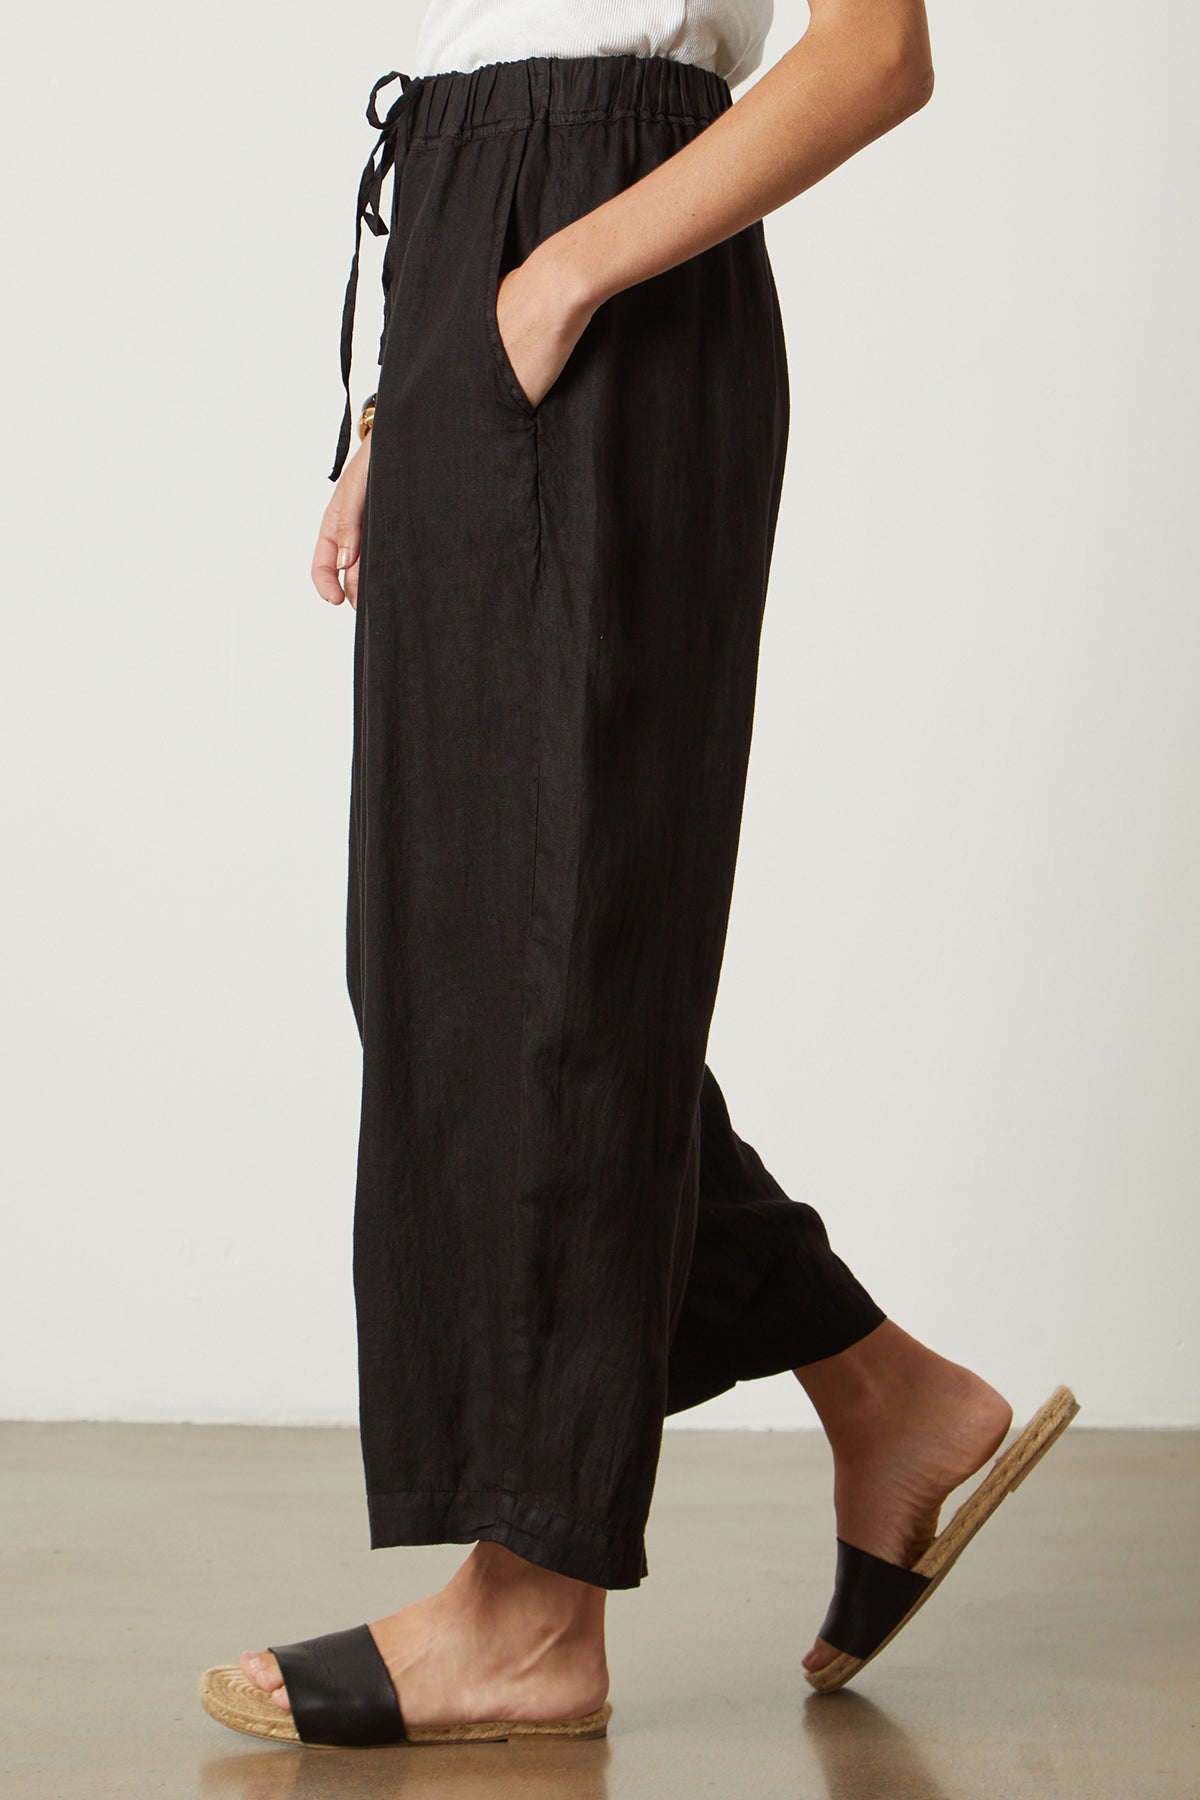 Hannah Linen Pant in black side with model hand in pocket-26142779670721